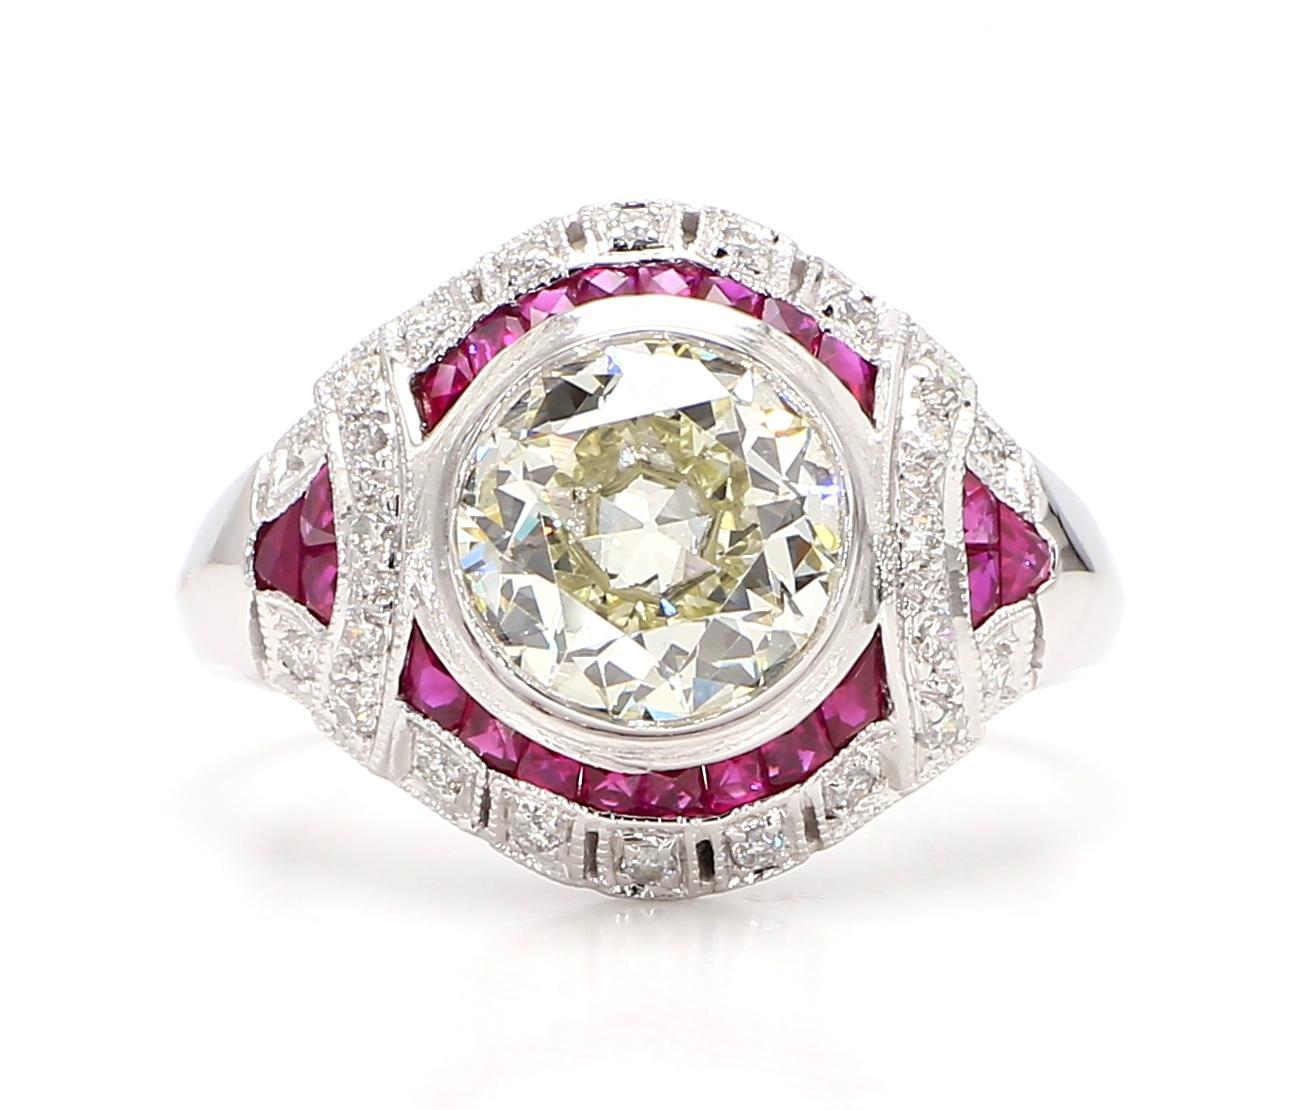 GIA Certified 2.56 Carat Diamond and 1.15 Carat Ruby Art Deco Platinum Ring For Sale 5